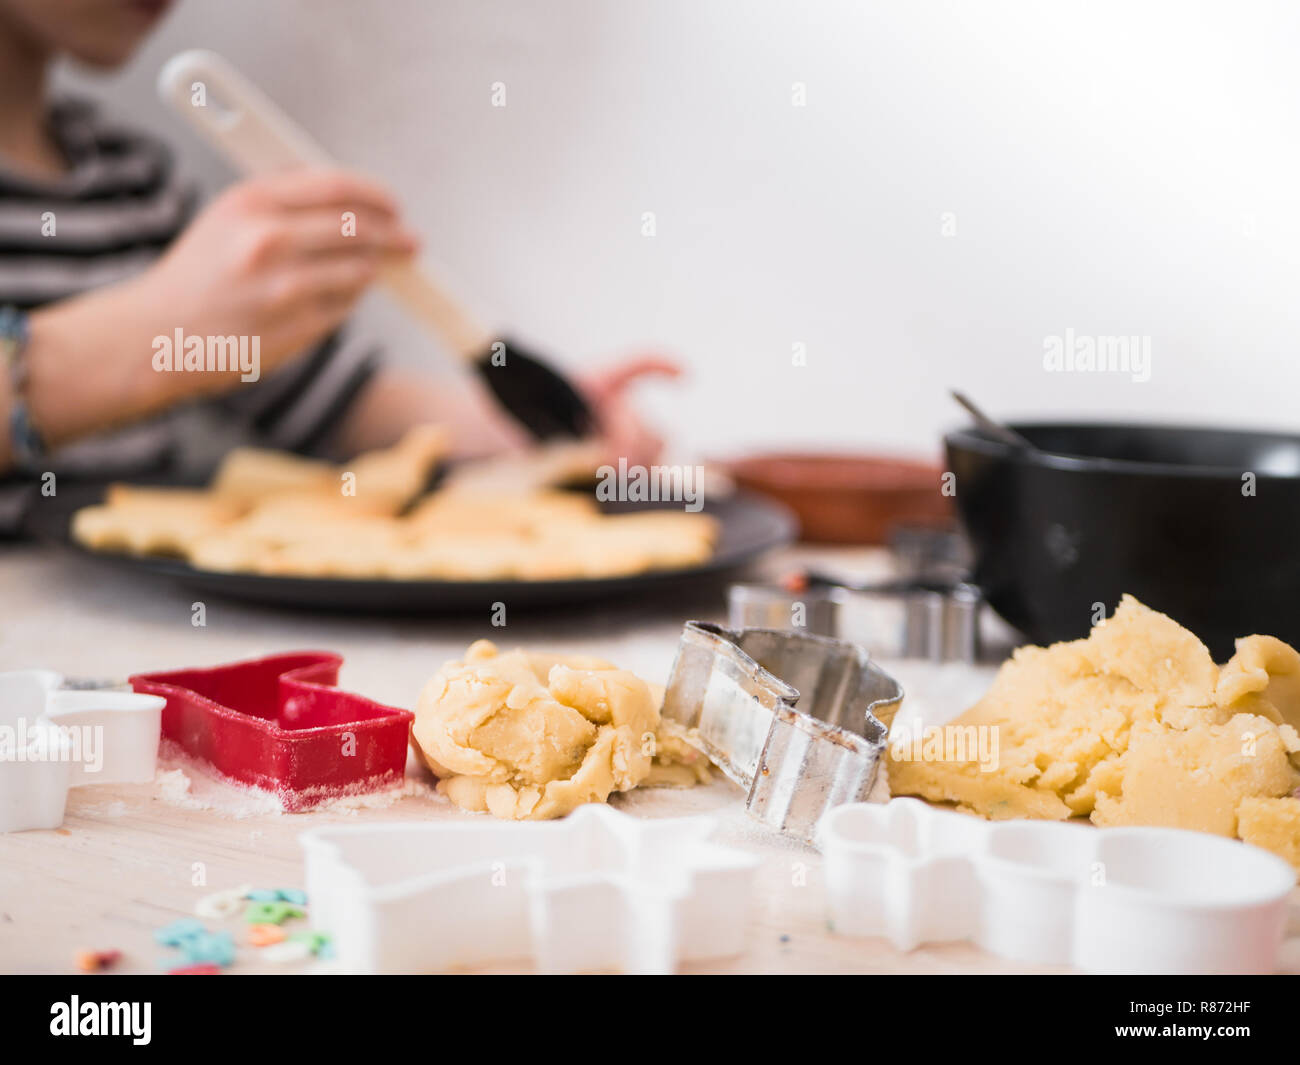 Christmas bakery: Little Girl painting cookie dough with sugar glazing, decorating Stock Photo